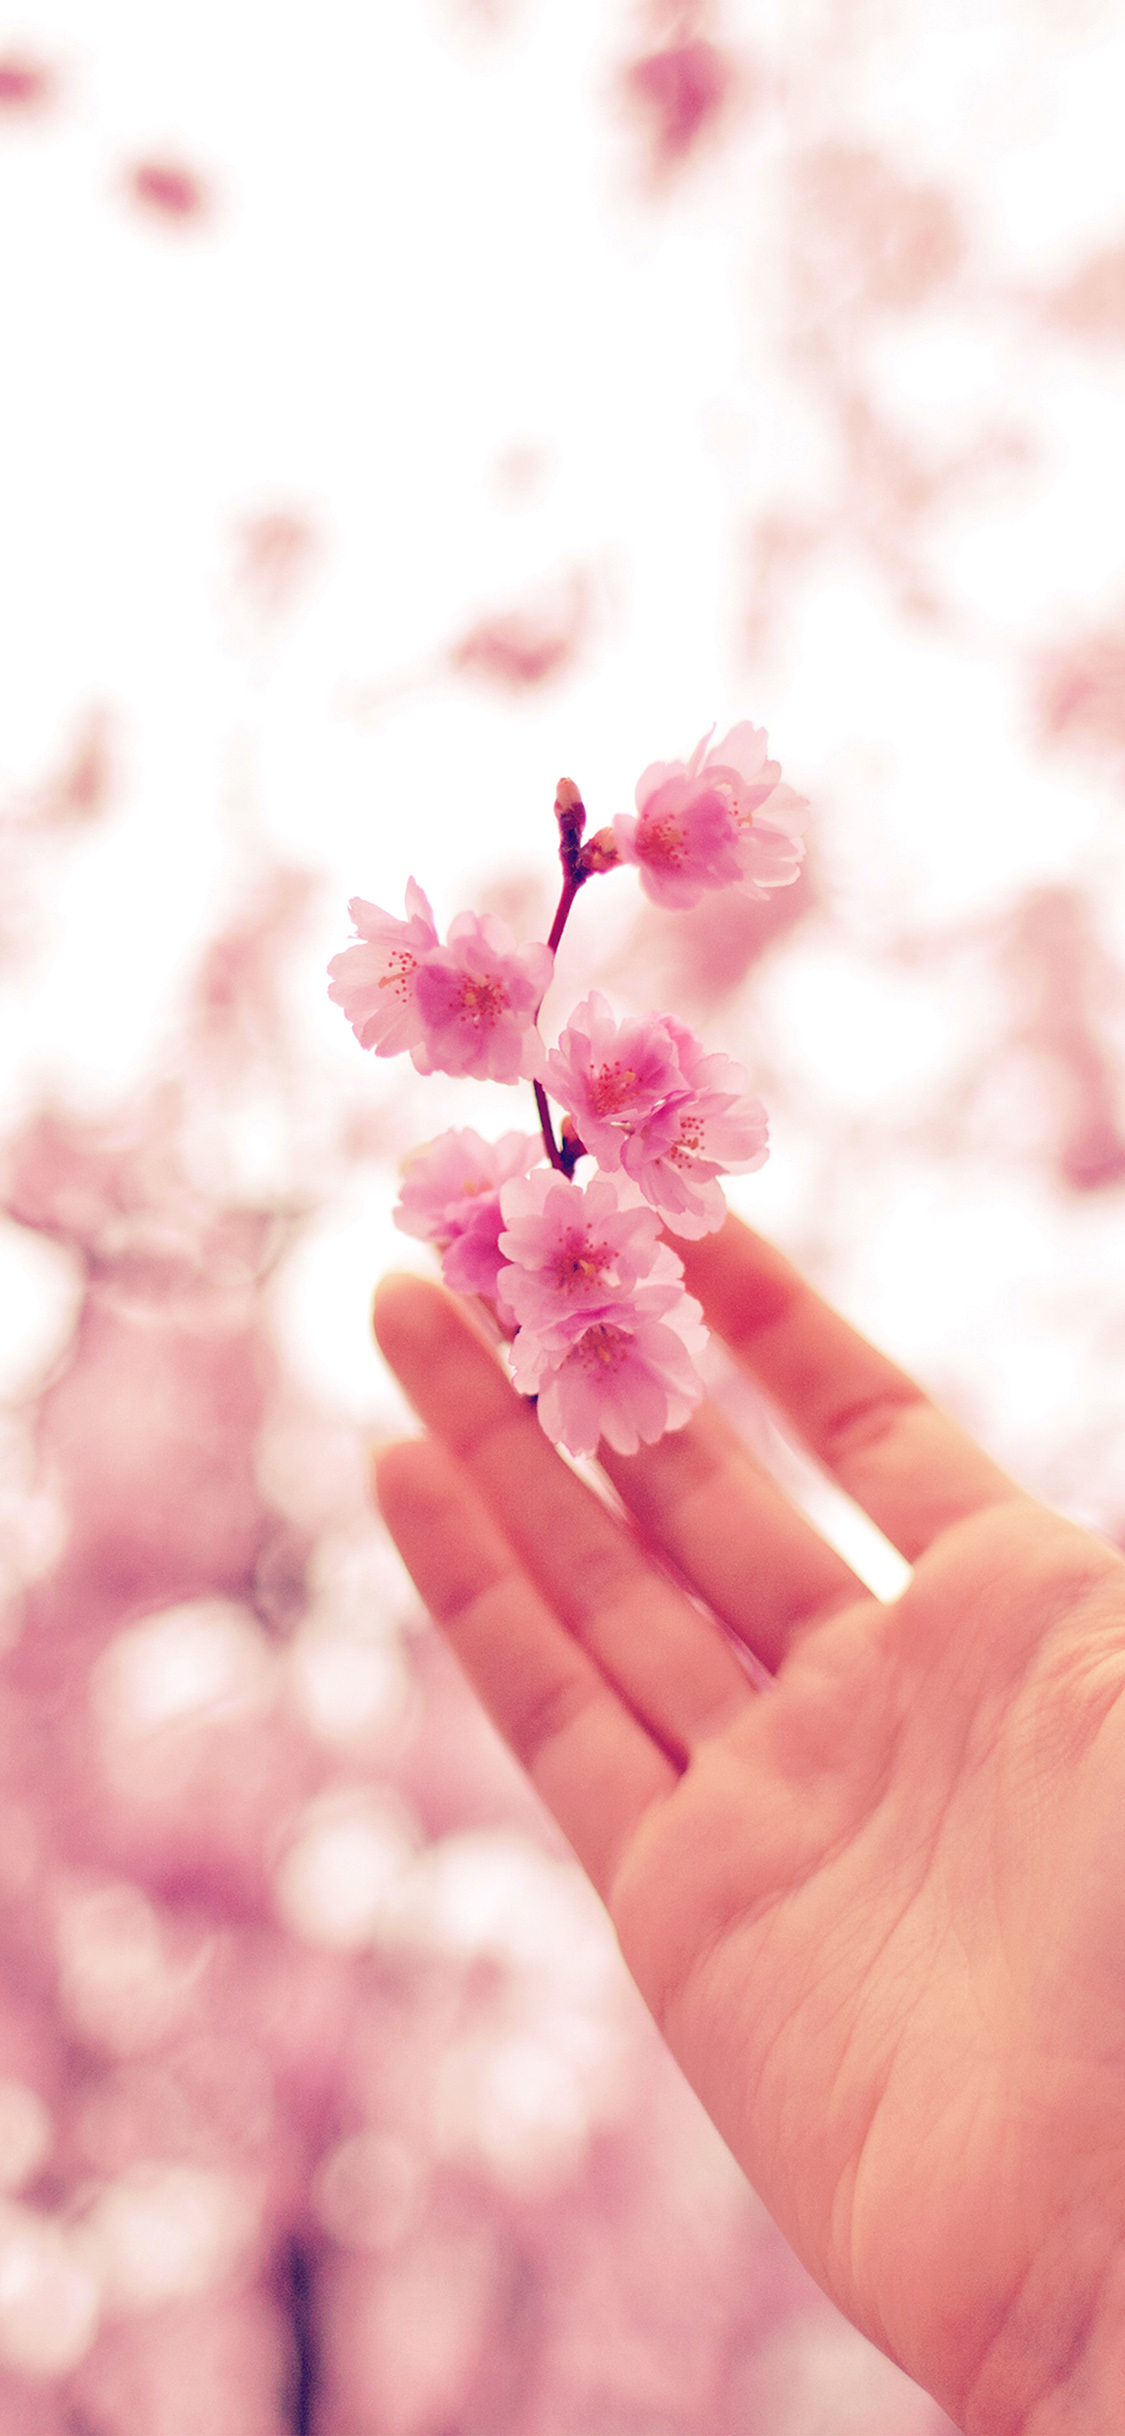 iPhone X wallpaper. spring cherry blossom bokeh nature pink